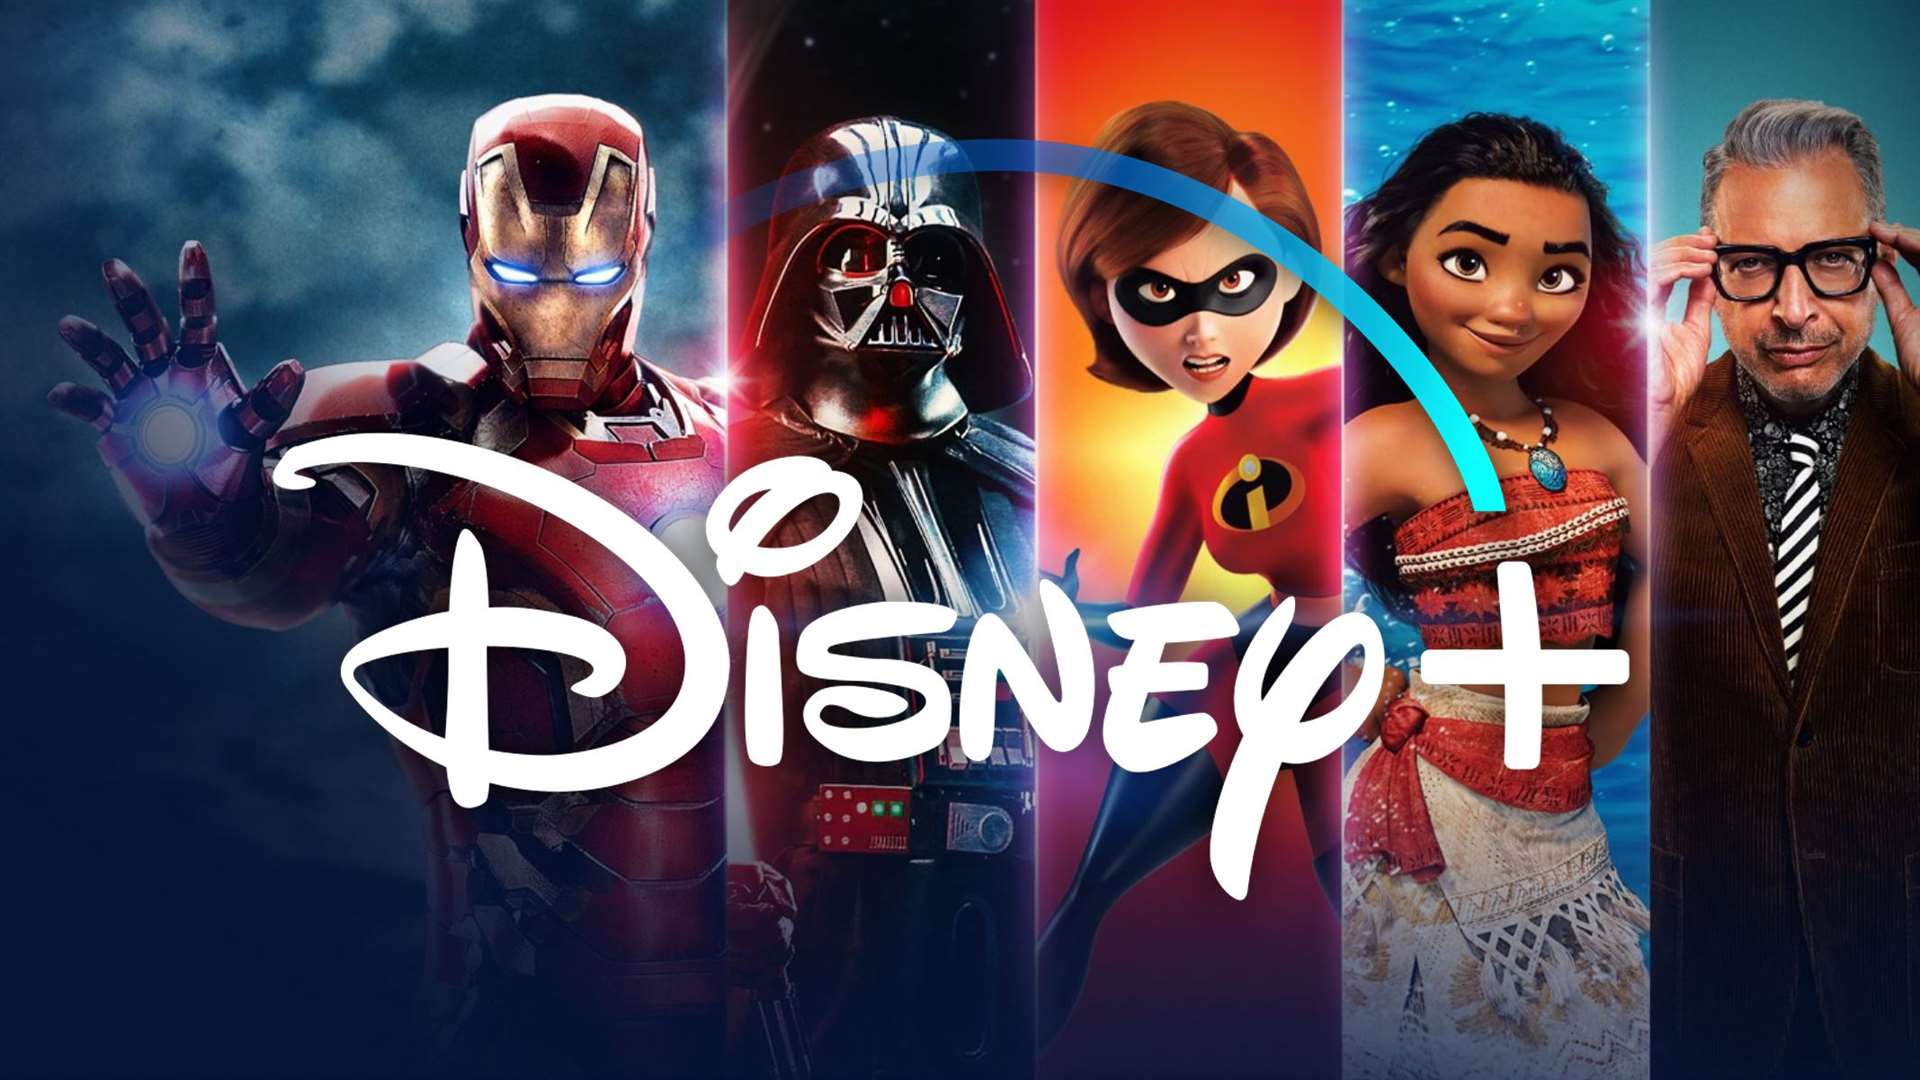 Disney+ has launched in the UK